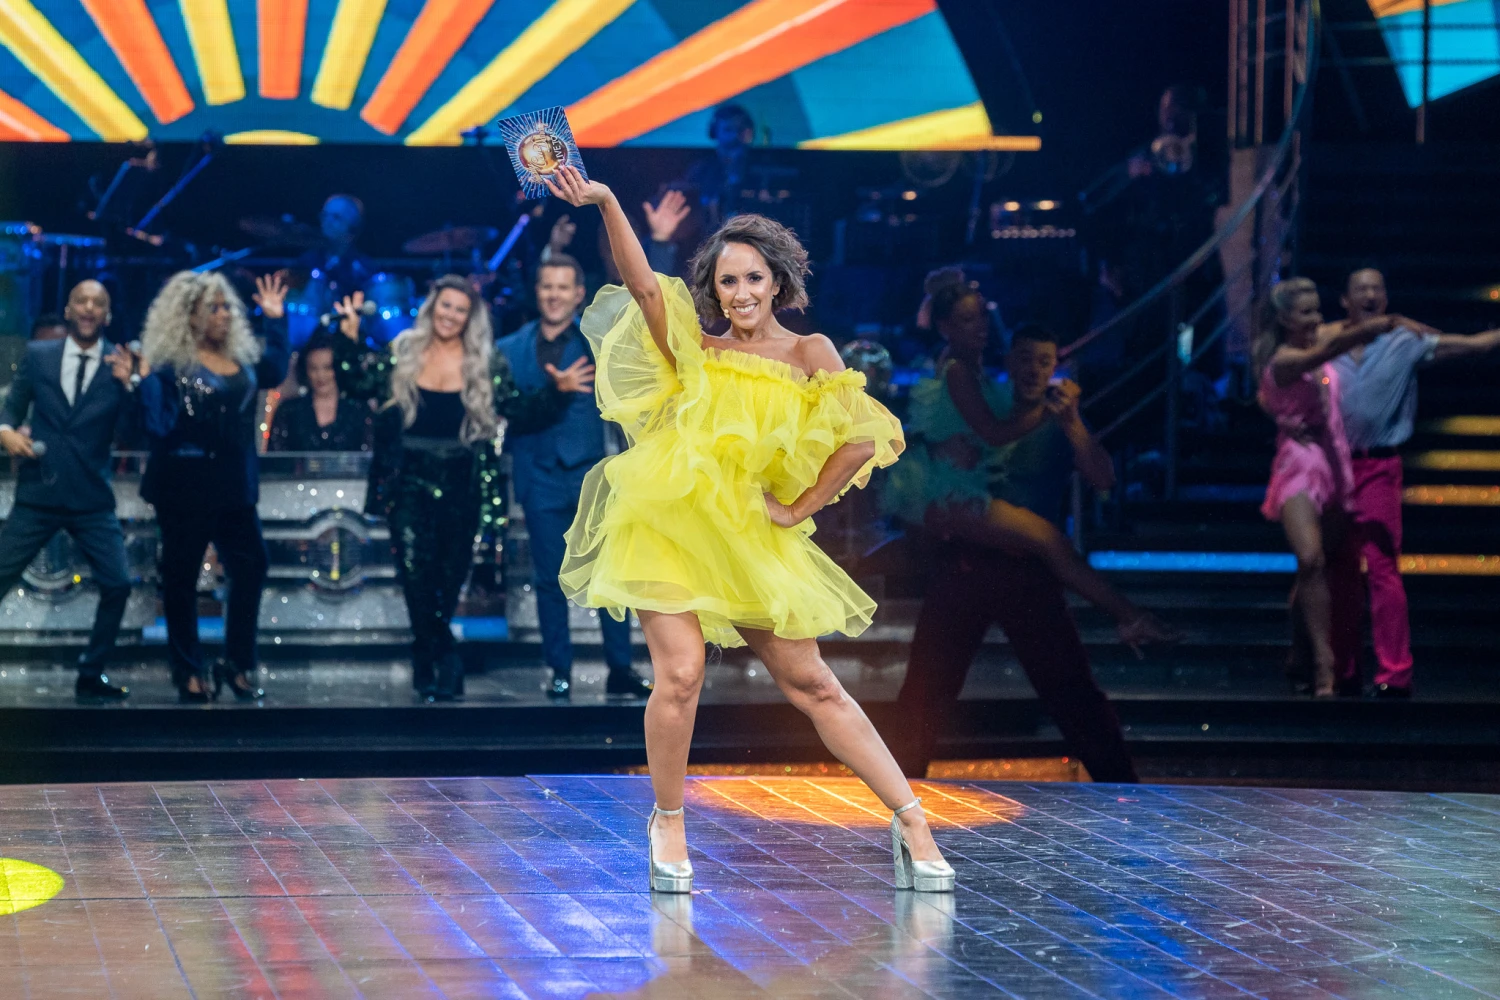 Strictly Come Dancing - London: What to expect - 4